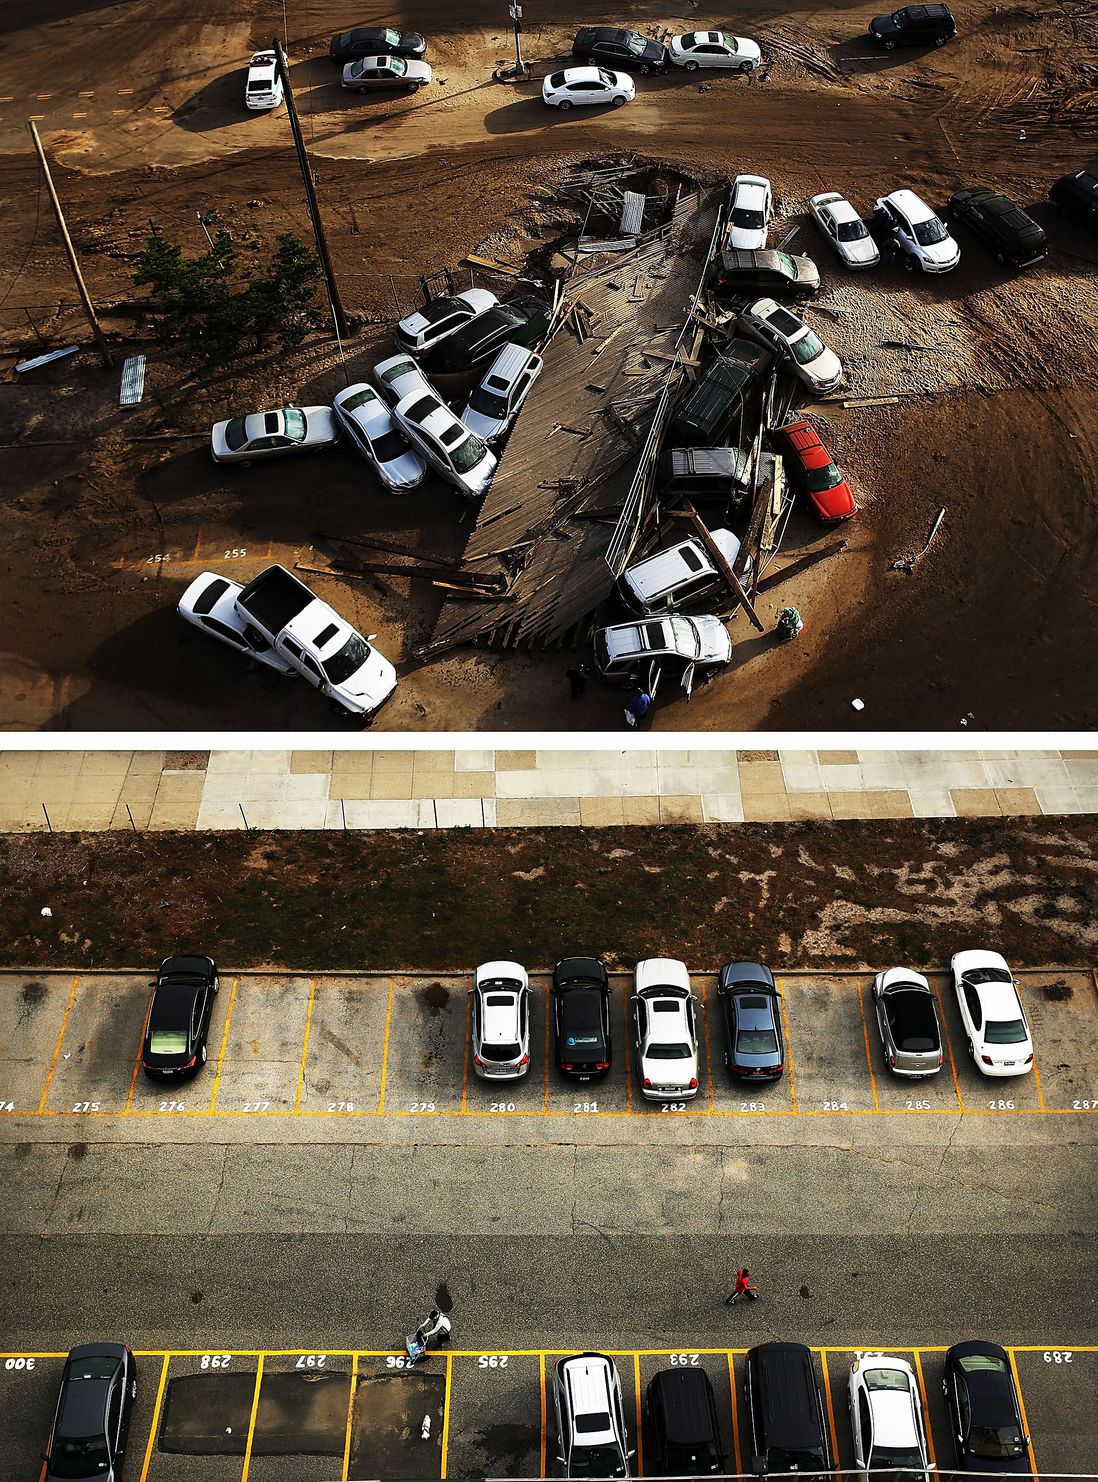 [Top] Abandoned and flooded cars are sit after Hurricane Sandy on November 2, 2012 in the Rockaway neighborhood, of the Queens borough of New York City. [Bottom] Cars sit in a parking lot on October 20, 2013.